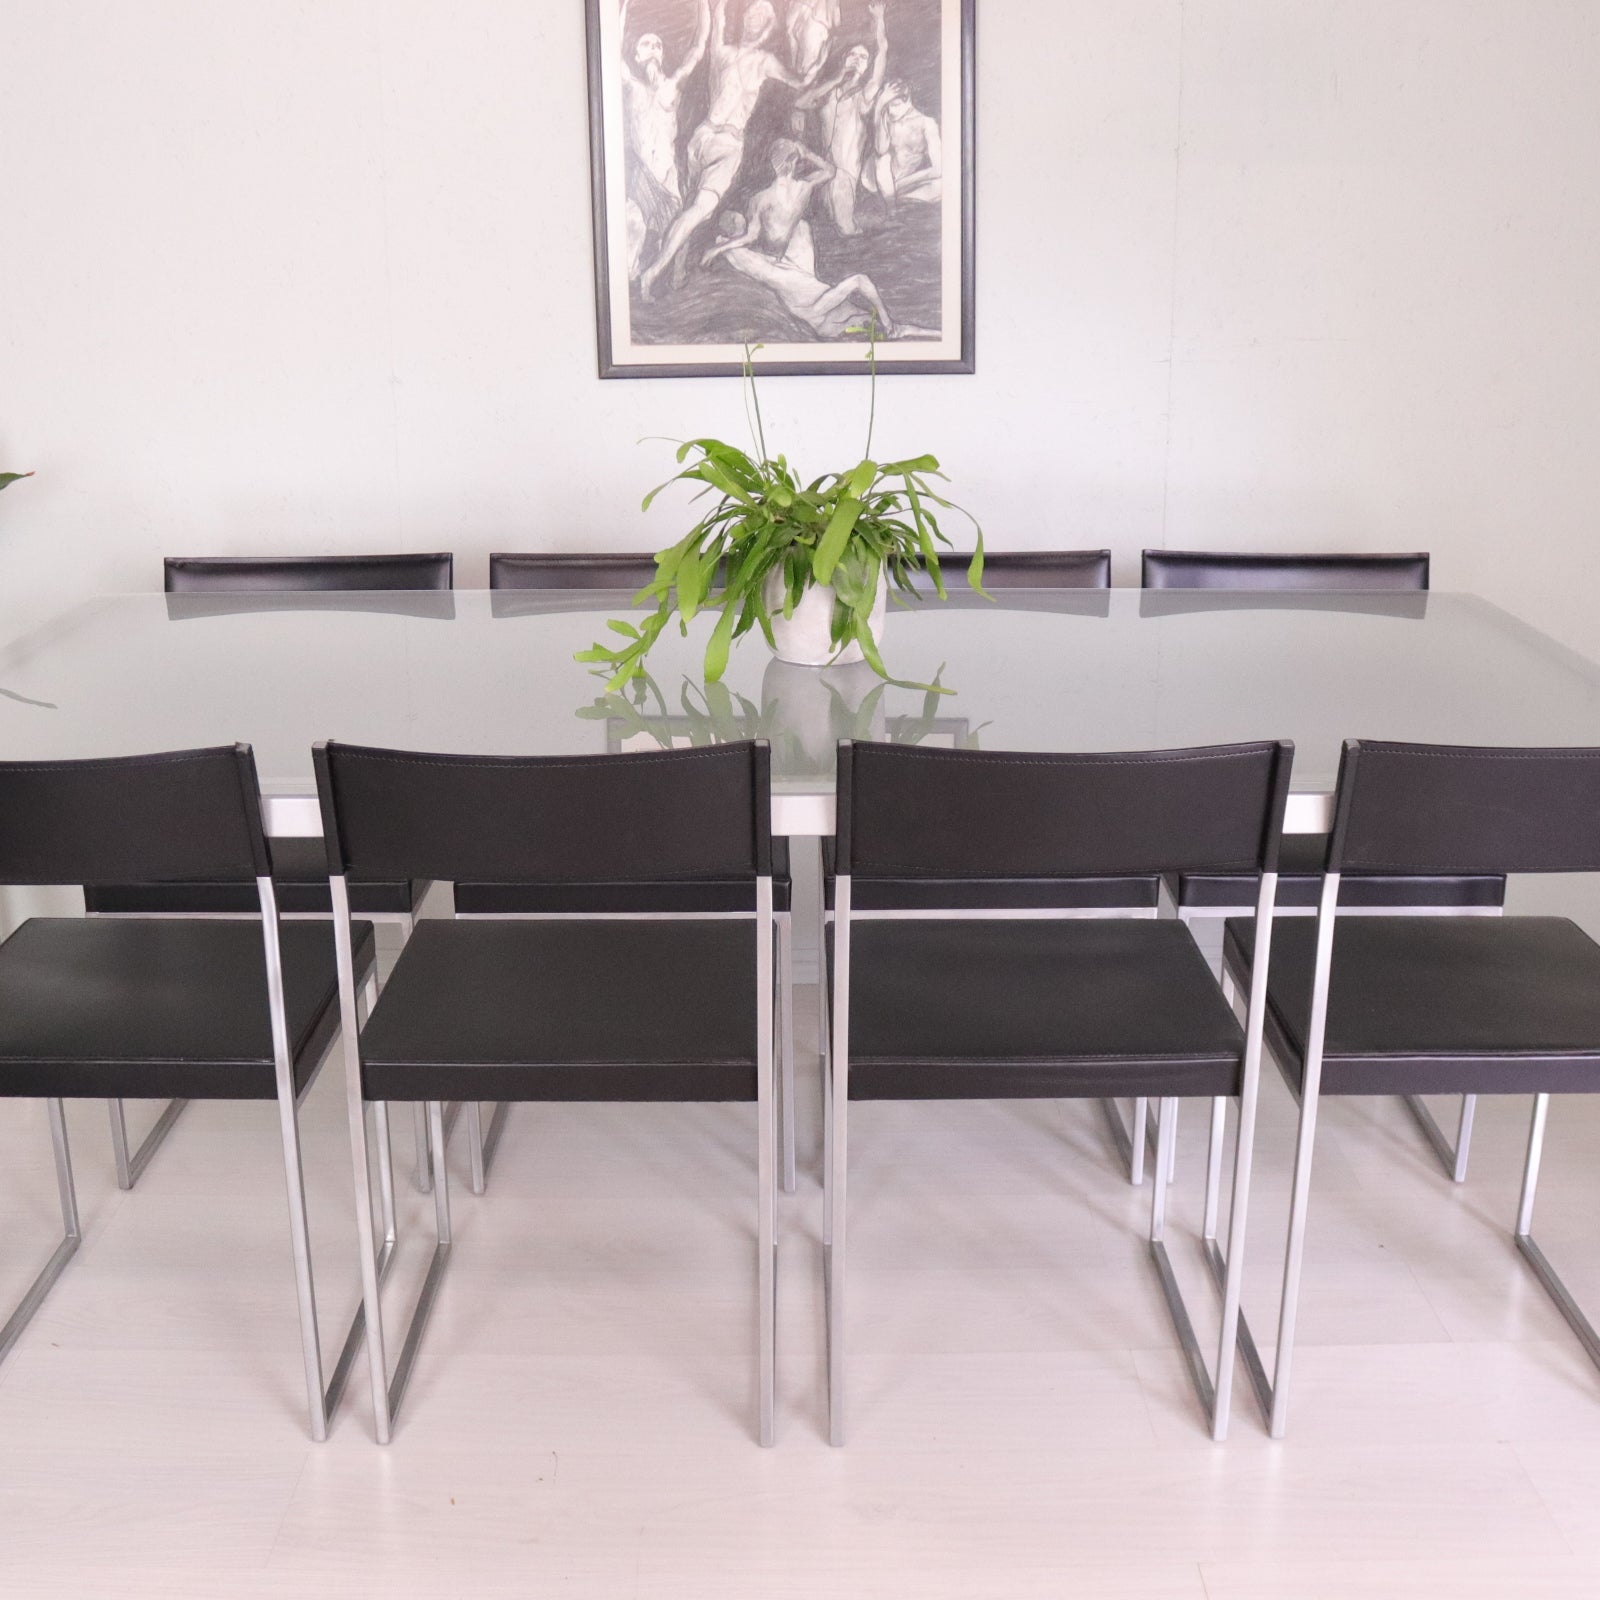 Large Swiss Metal and Glass Dining Table with Eight Chairs - teakyfinders